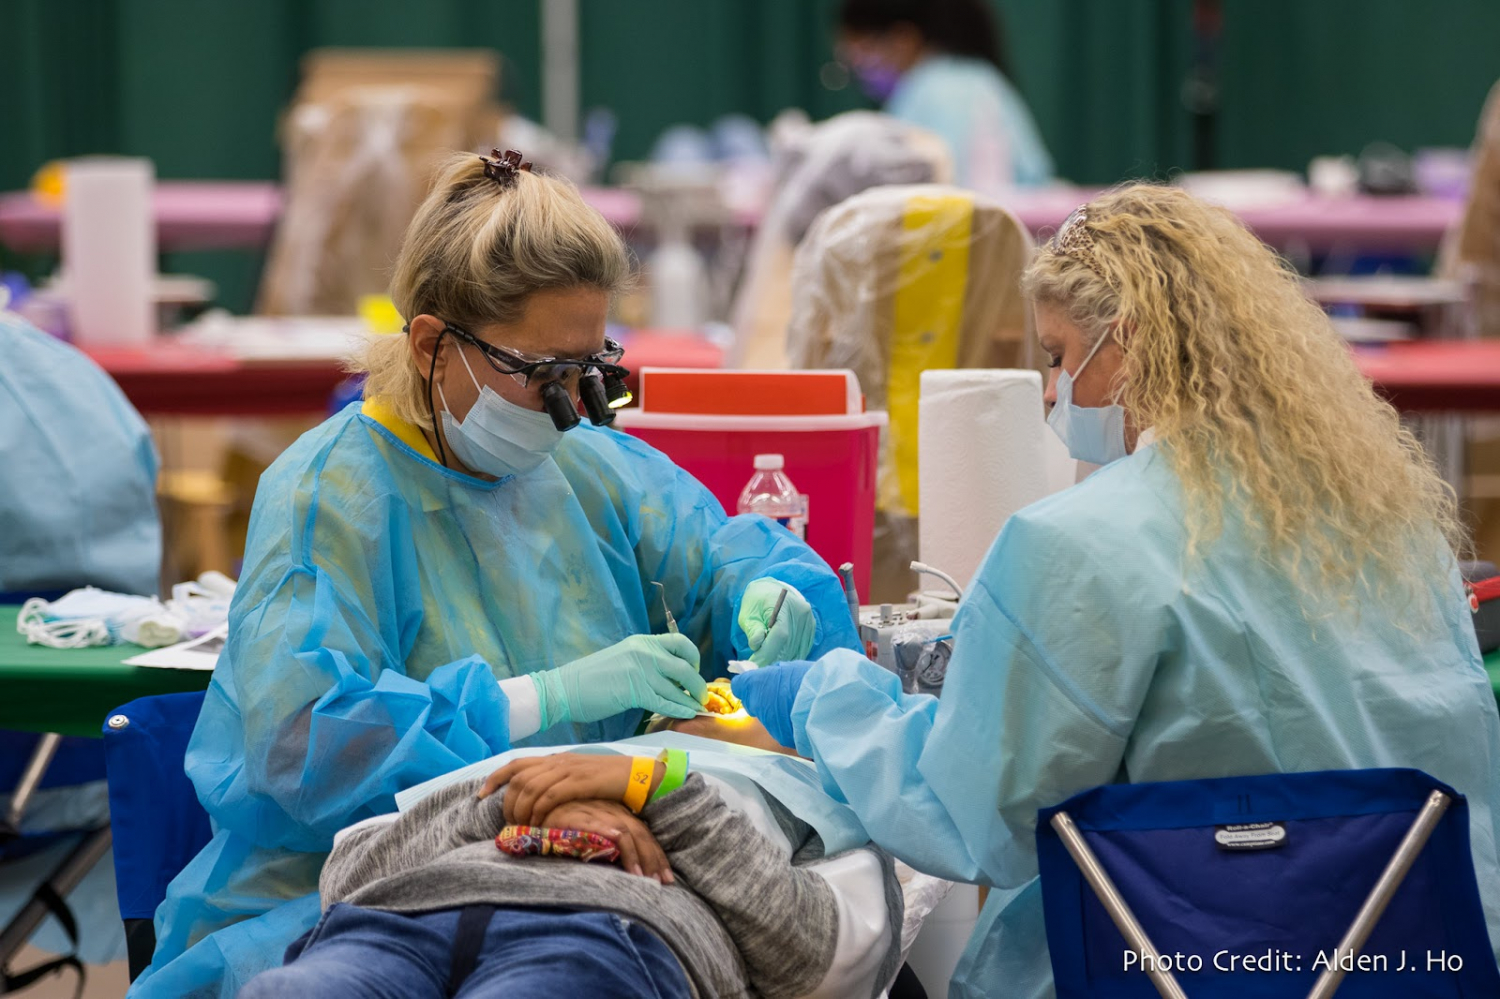 Free medical and dental care available at Lucas Oil Stadium starting Sunday